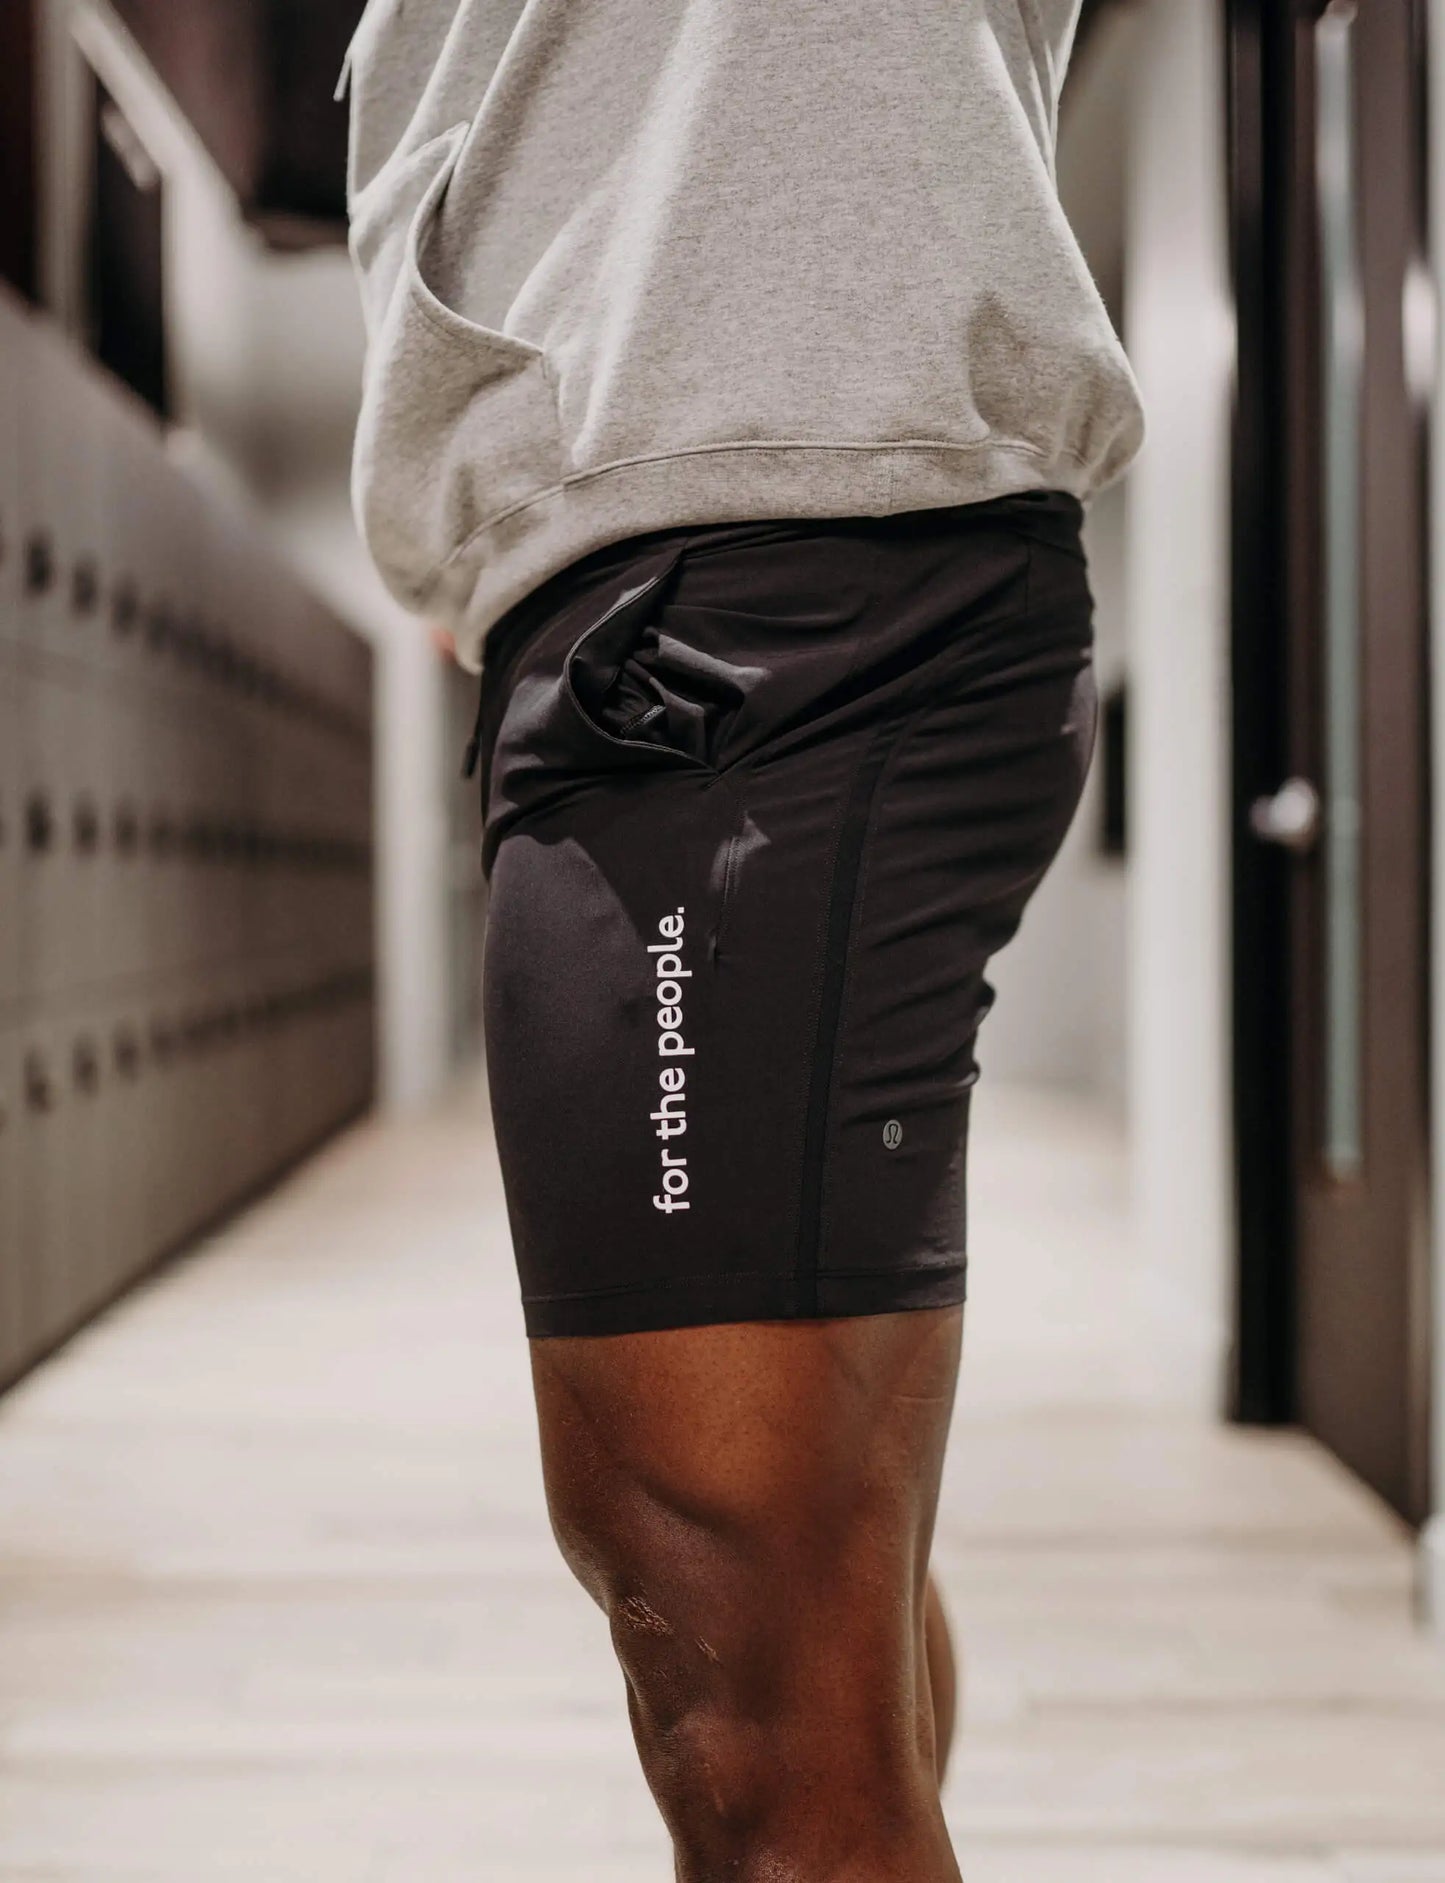 Lululemon Pace Breaker Linerless Short in Black with "for the people" printed vertically on left leg